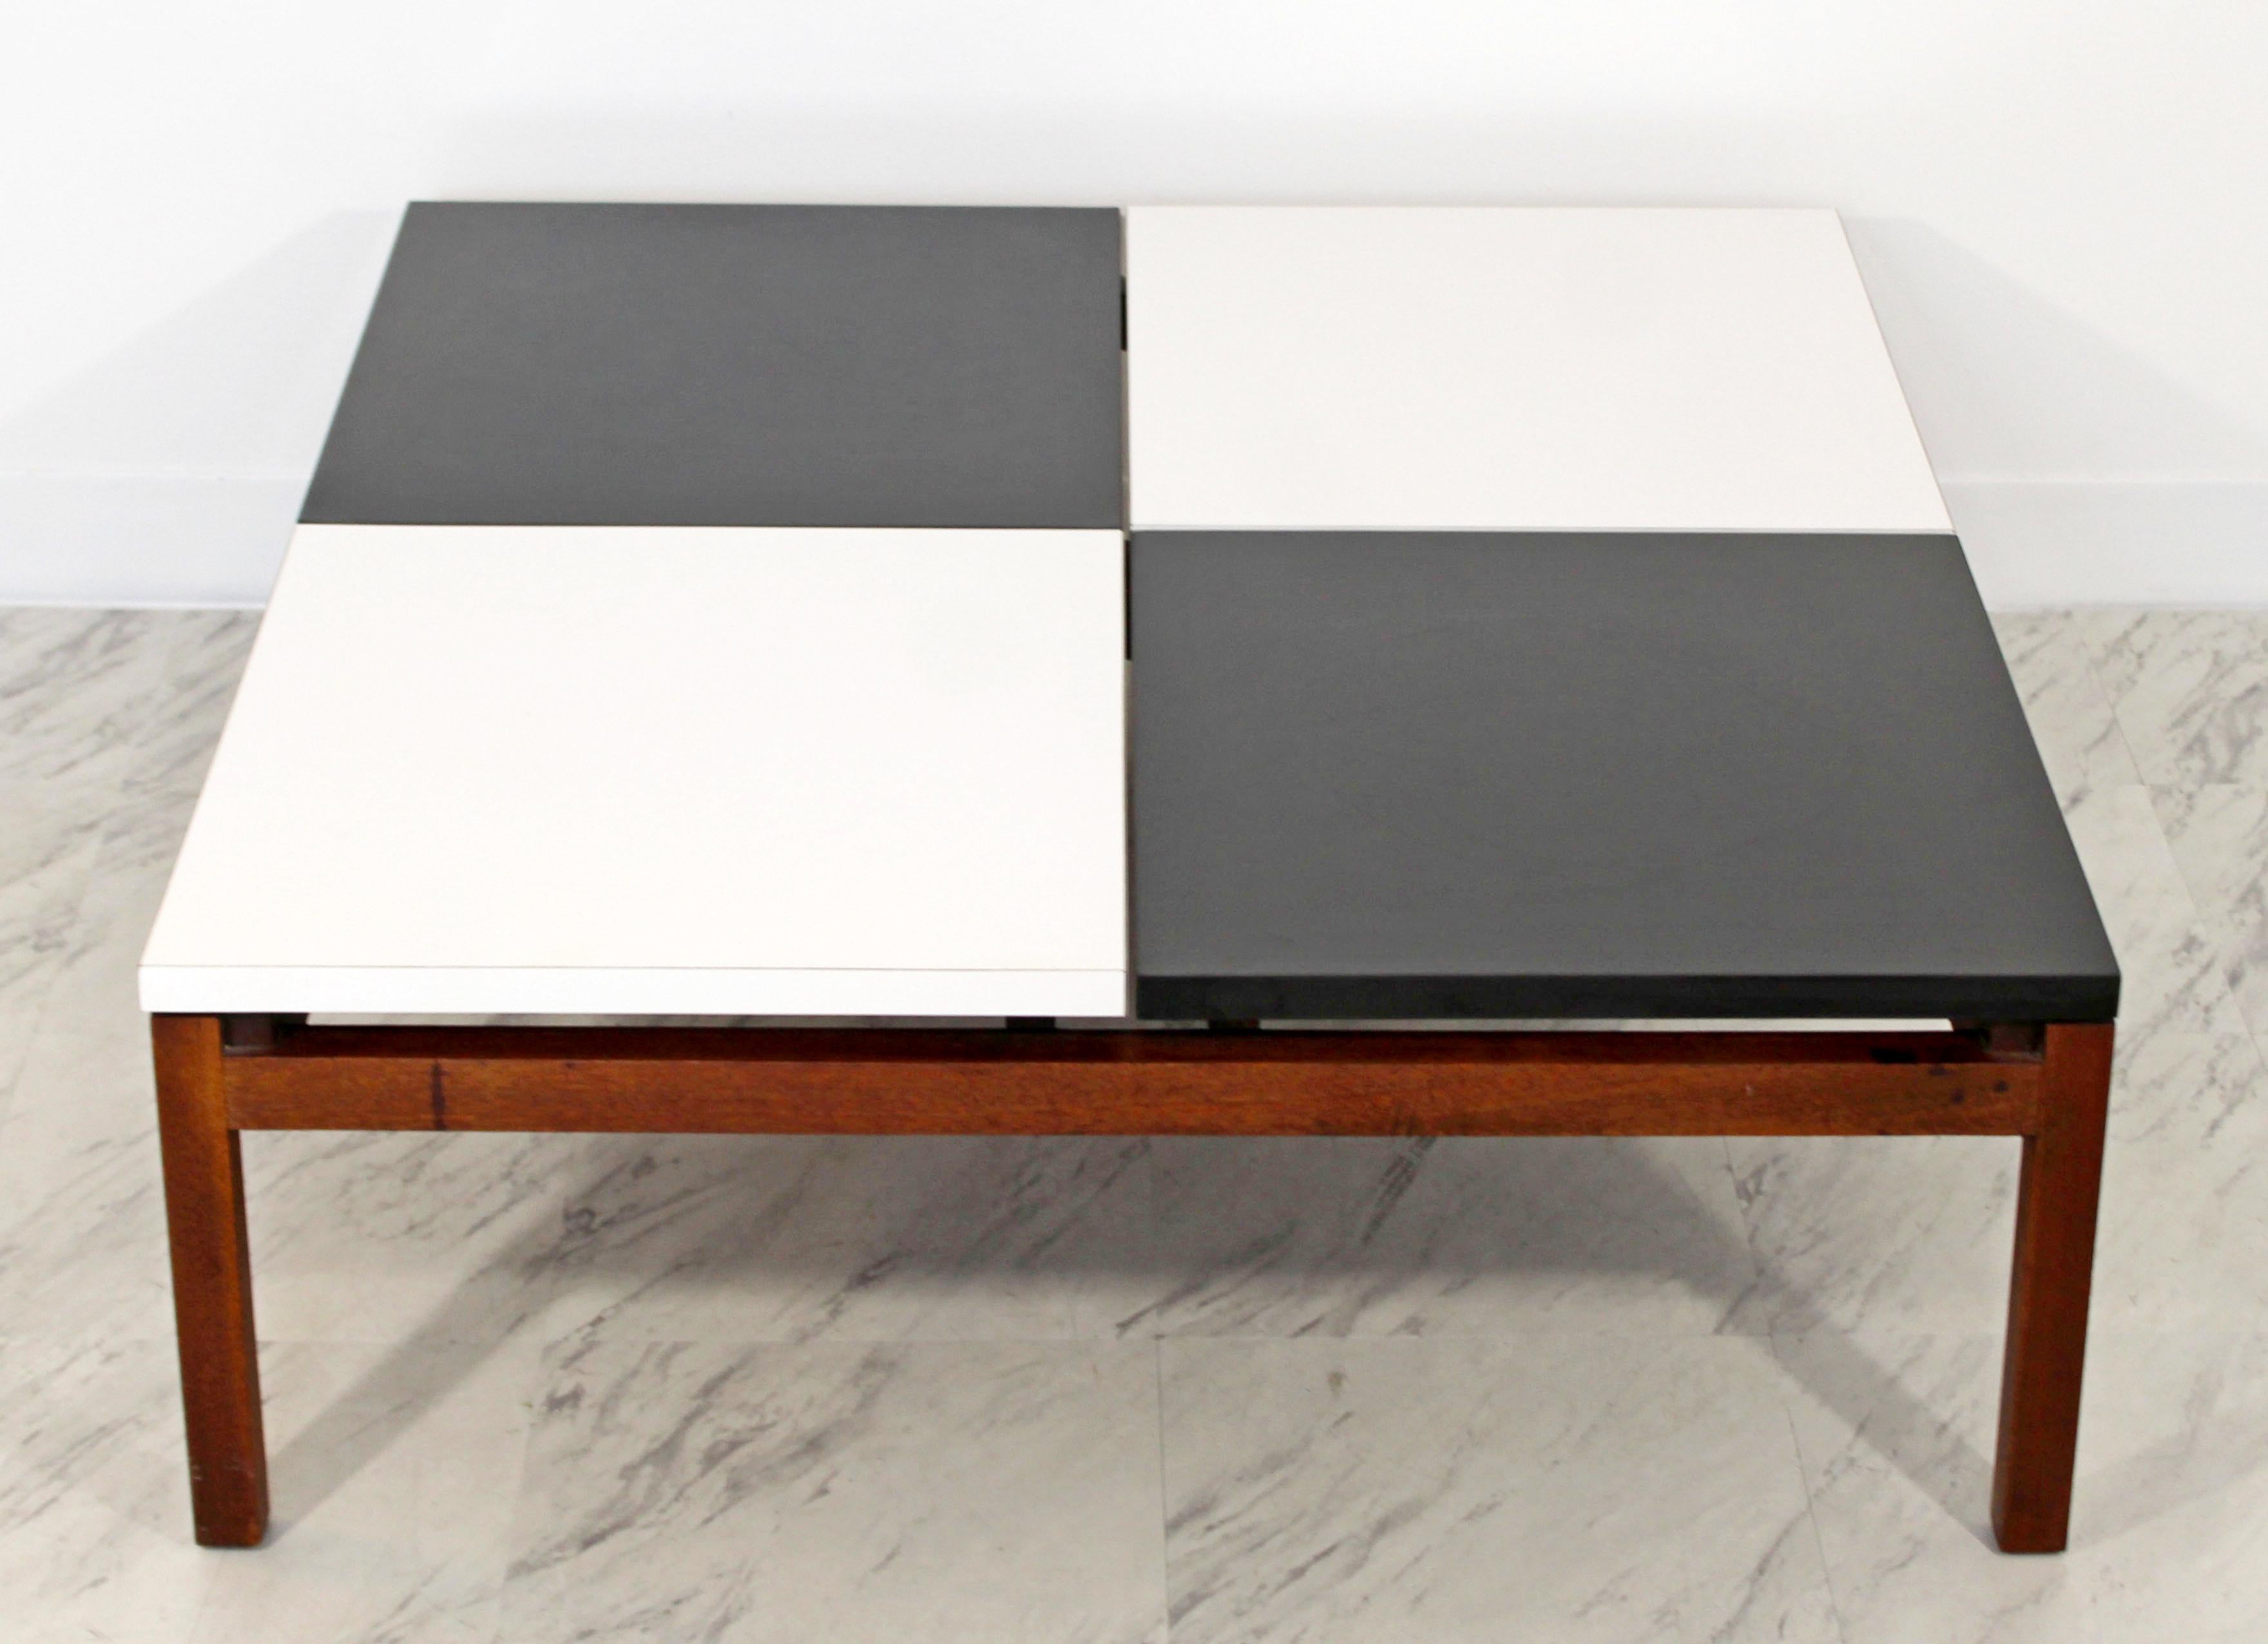 For your consideration is an extraordinary coffee table, with a segmented black and white formica top, on a solid wood base, by Lewis Butler for Knoll, circa 1960s. In very good condition. The dimensions are 38